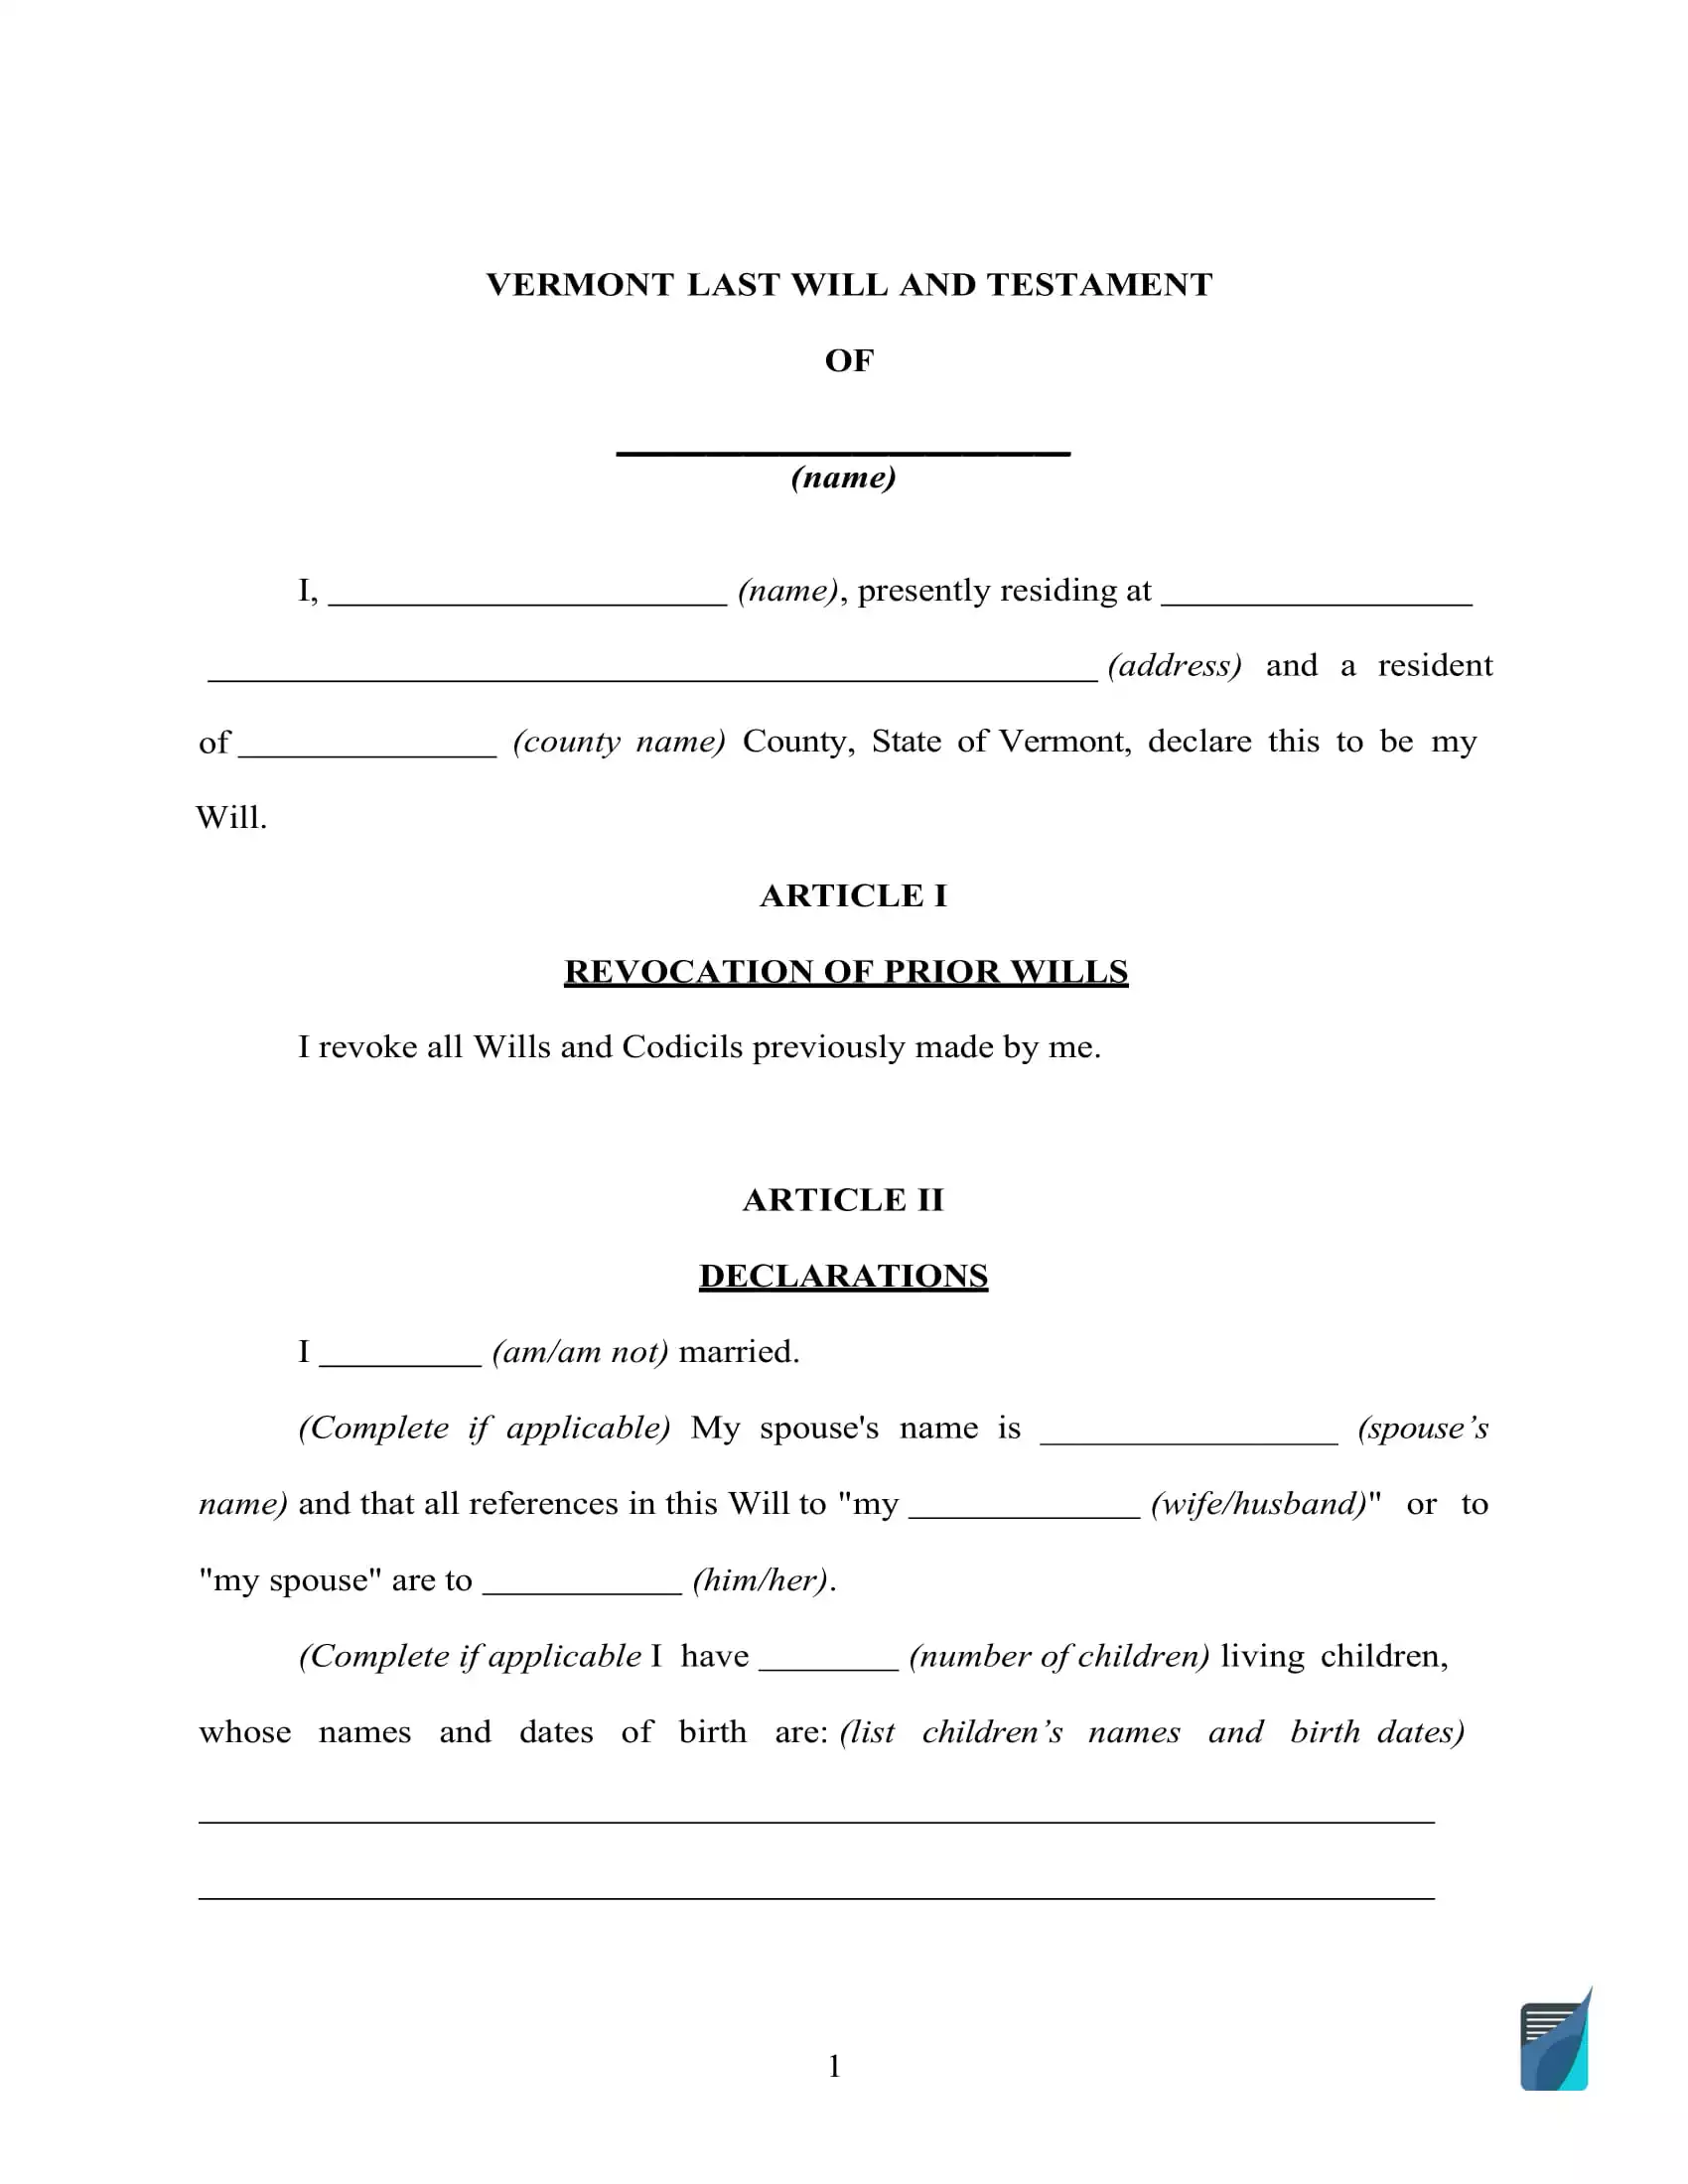 vermont-last-will-and-testament-template